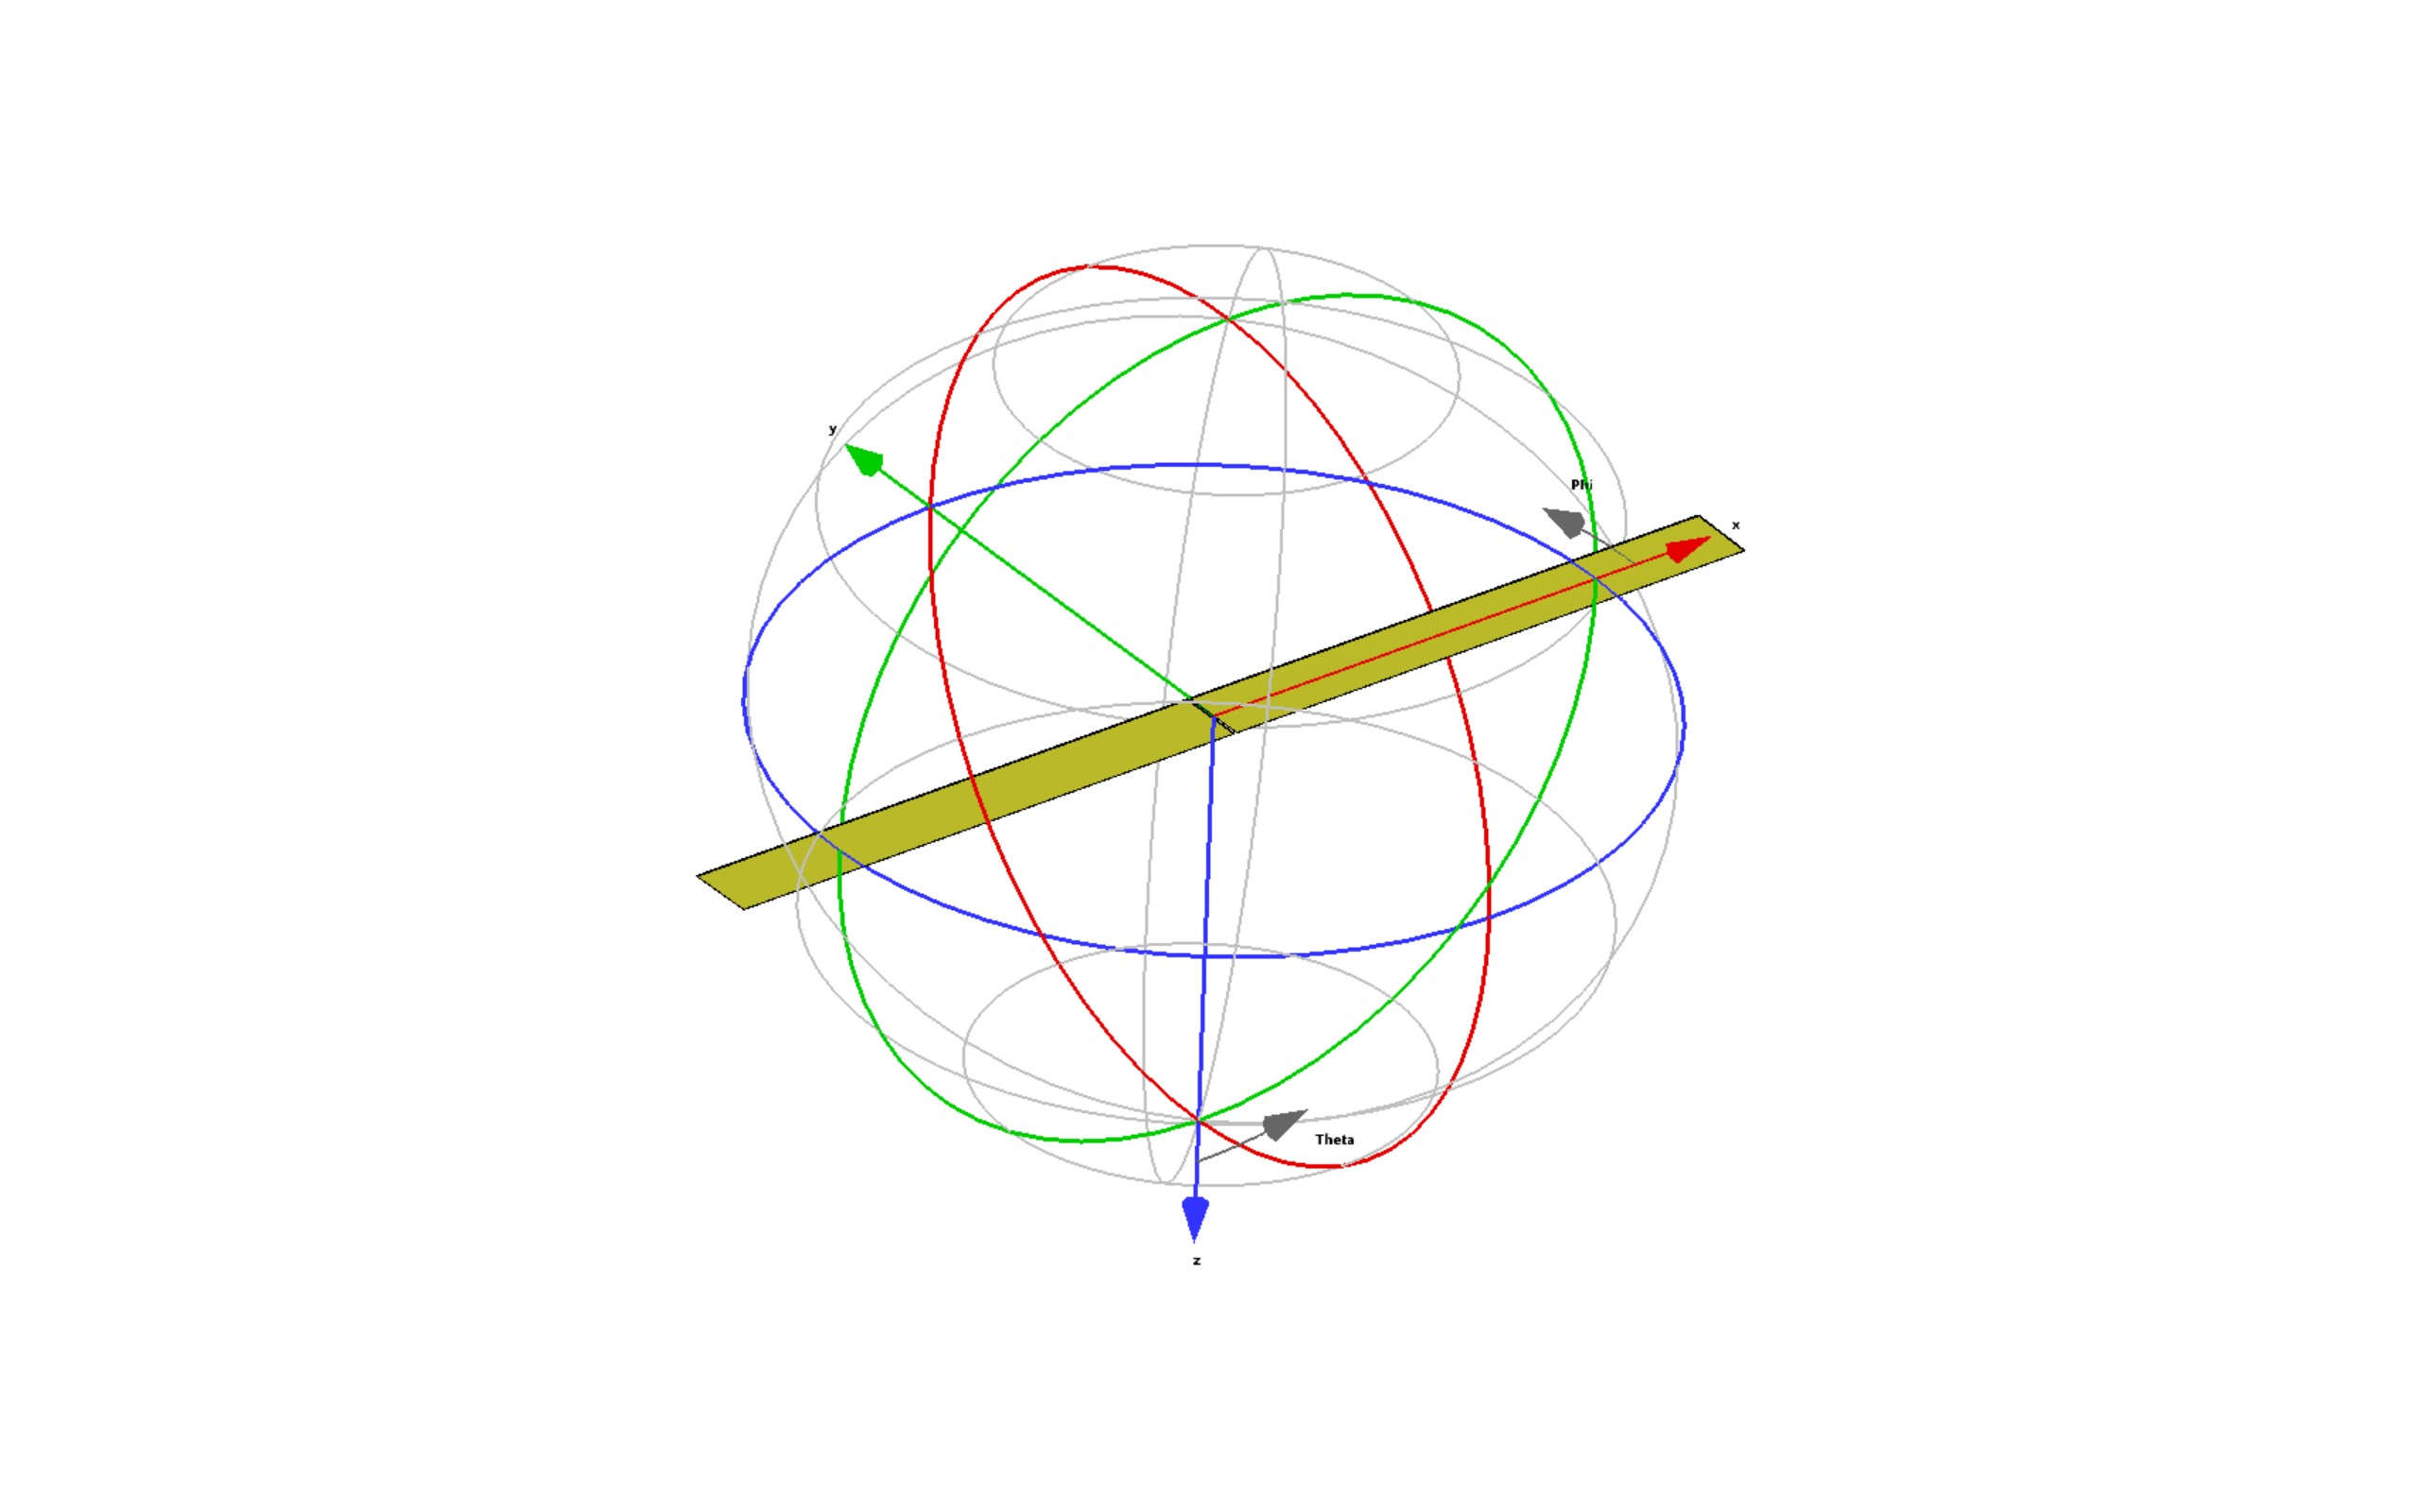 3D visualization of a planar dipole antenna from high frequency simulations.